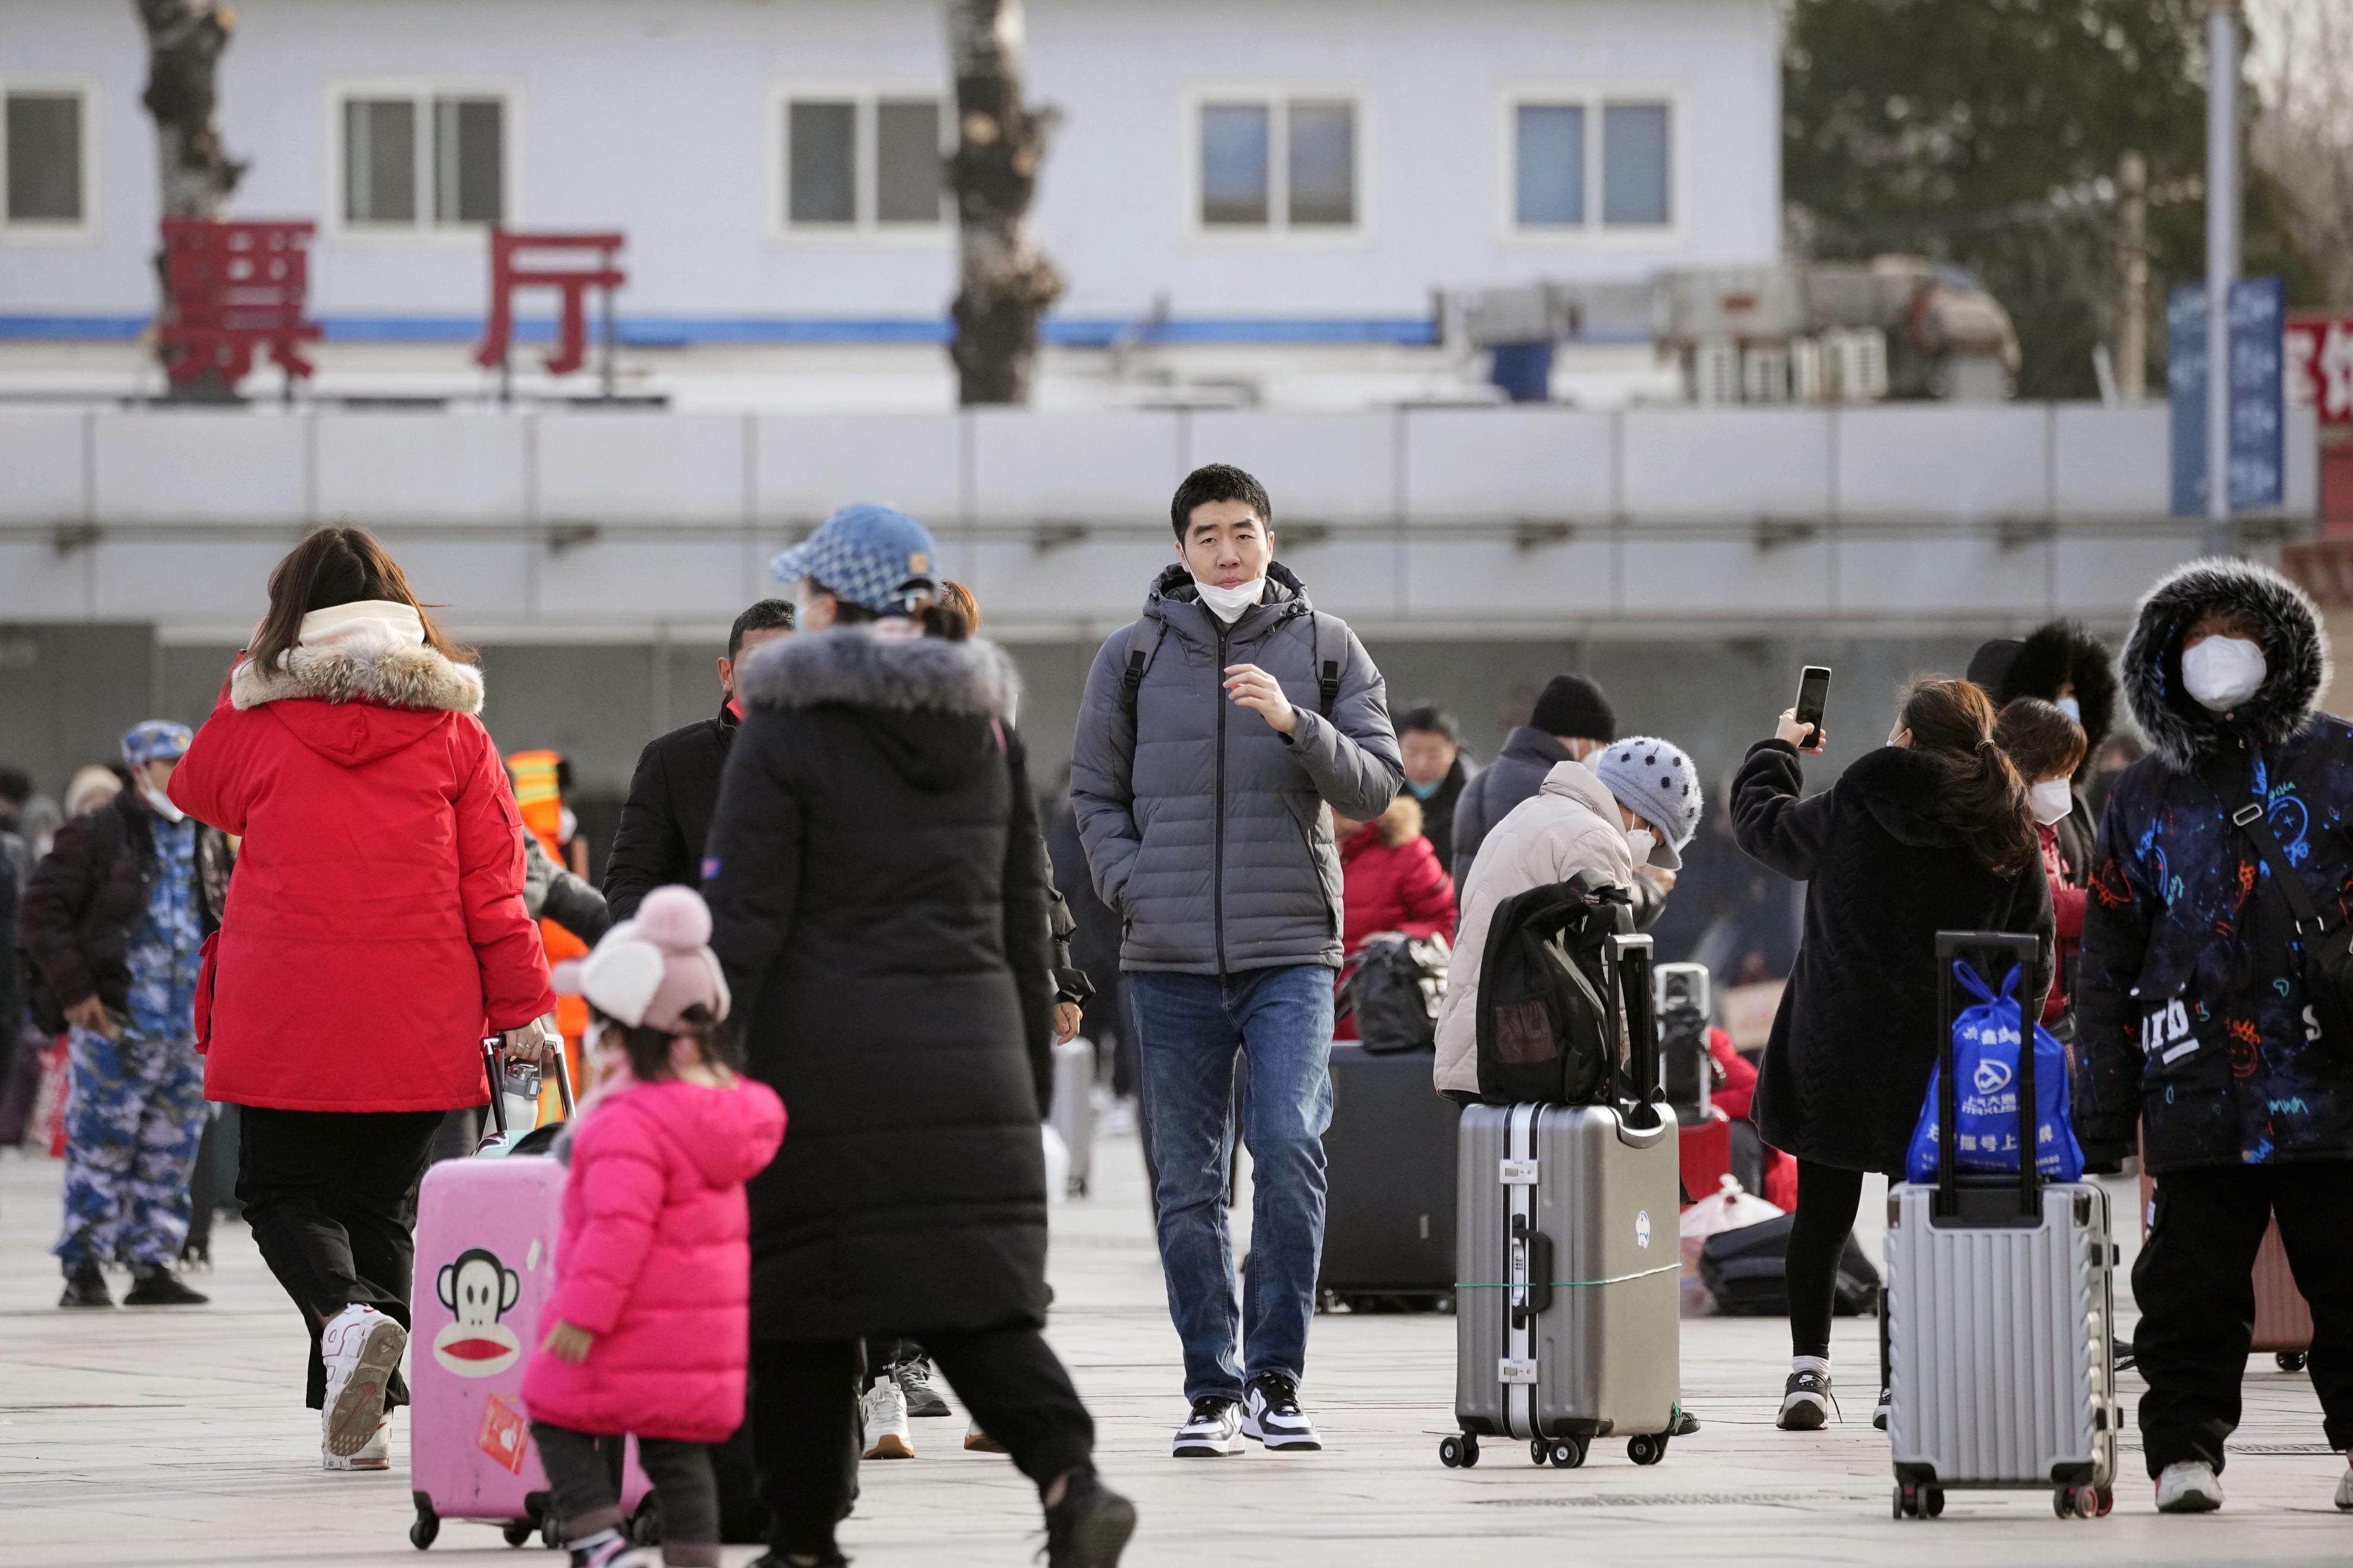 British analytics firm Airfinity predicted China’s Covid-19 infections would peak around January 13, when millions are expected to travel for Lunar New Year. Photo: Kyodo
